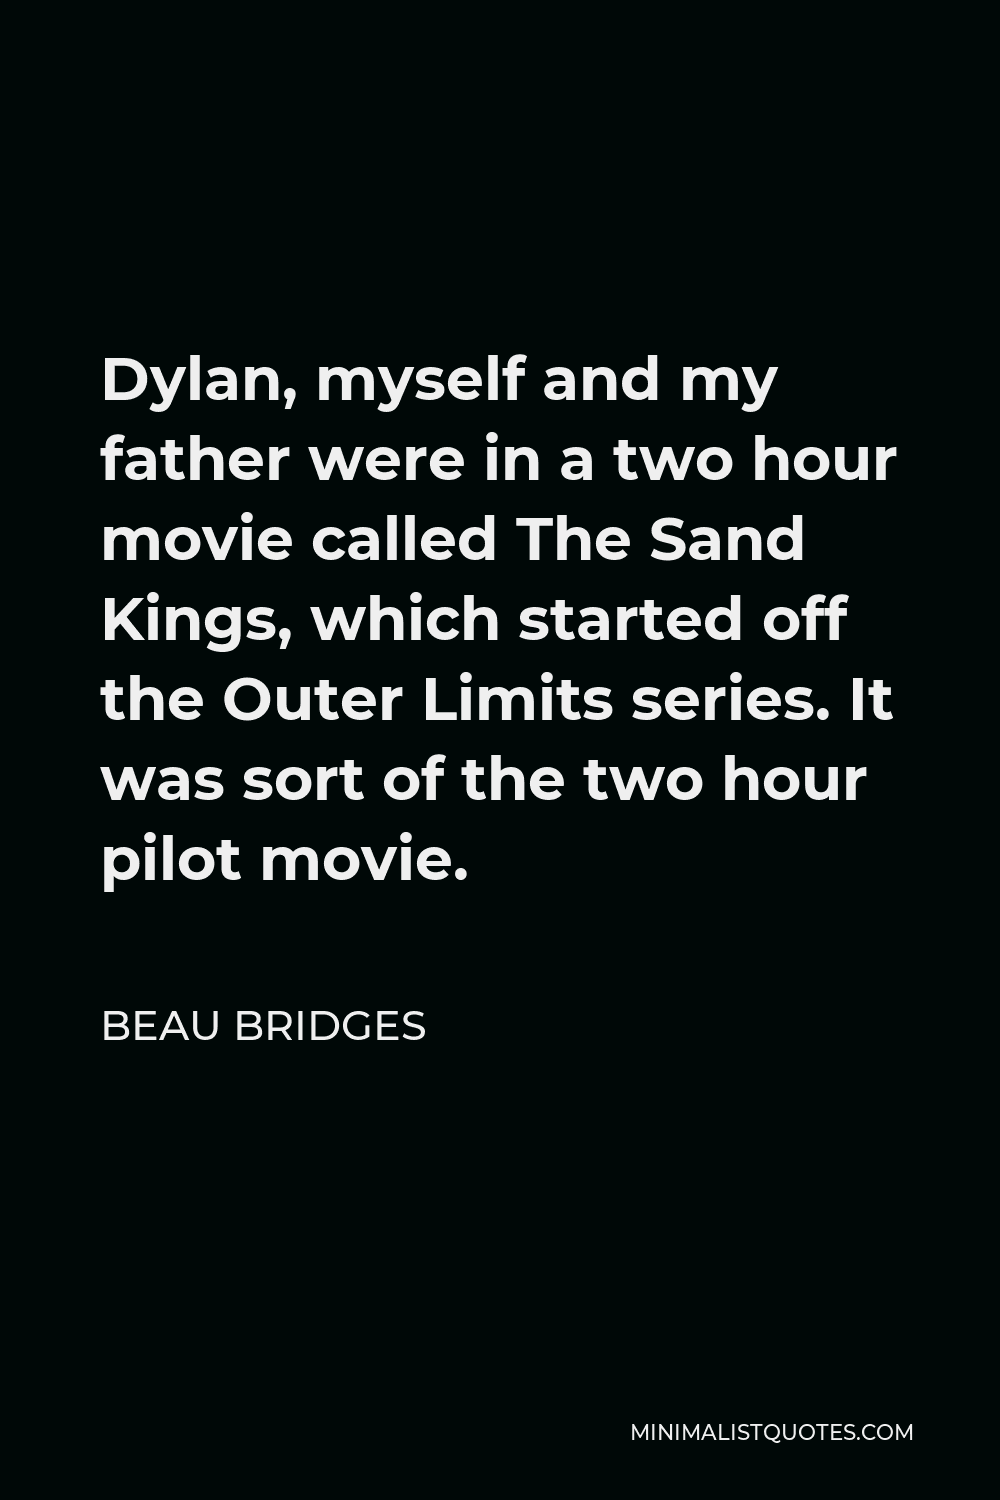 Beau Bridges Quote - Dylan, myself and my father were in a two hour movie called The Sand Kings, which started off the Outer Limits series. It was sort of the two hour pilot movie.